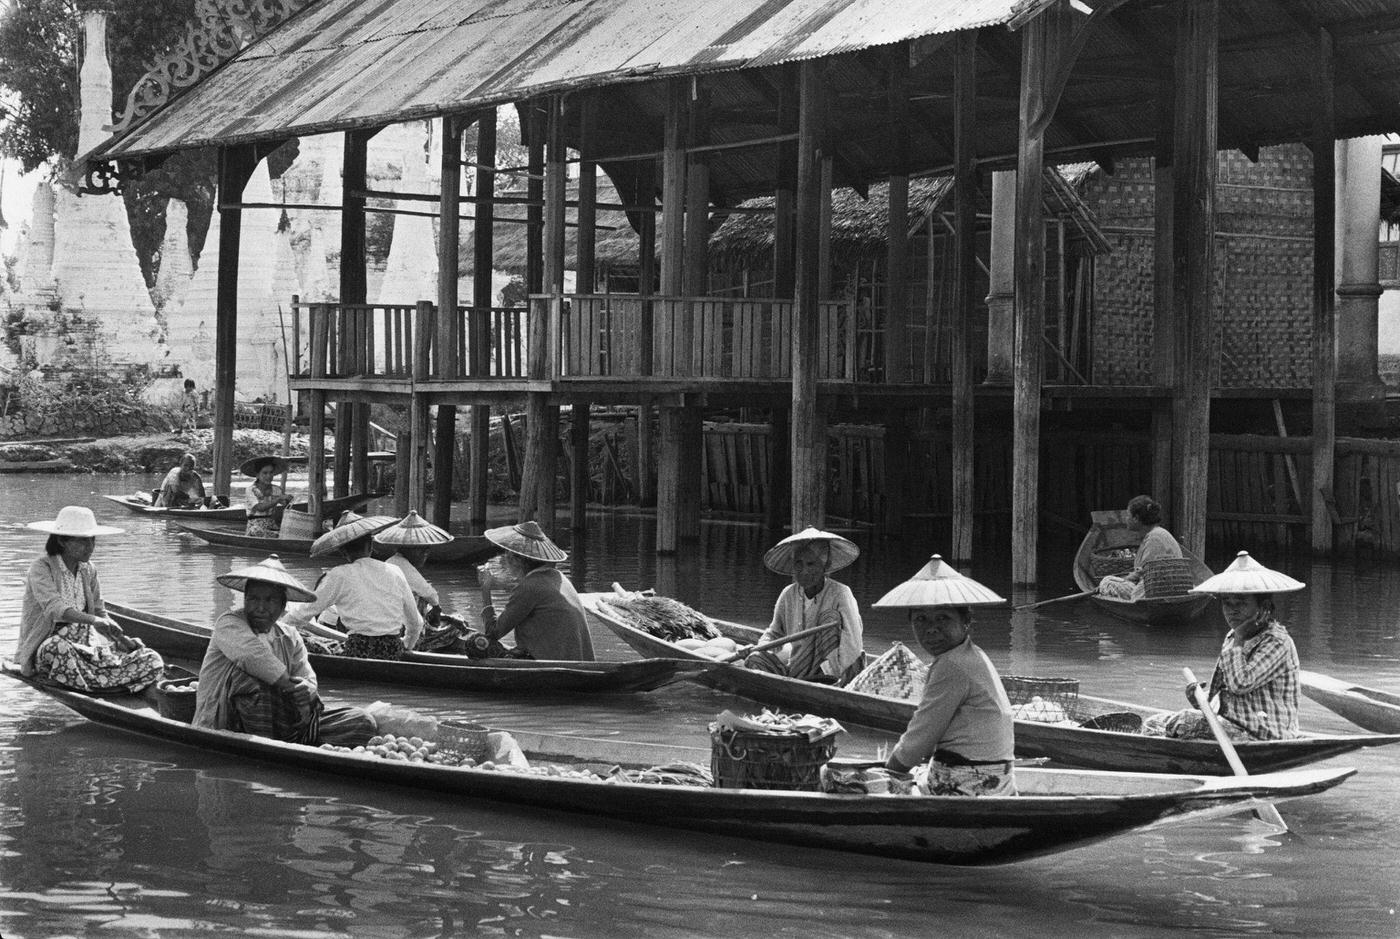 Women sell goods from boats at a floating market on Inle Lake, Taunggyi District, Burma, 1988.